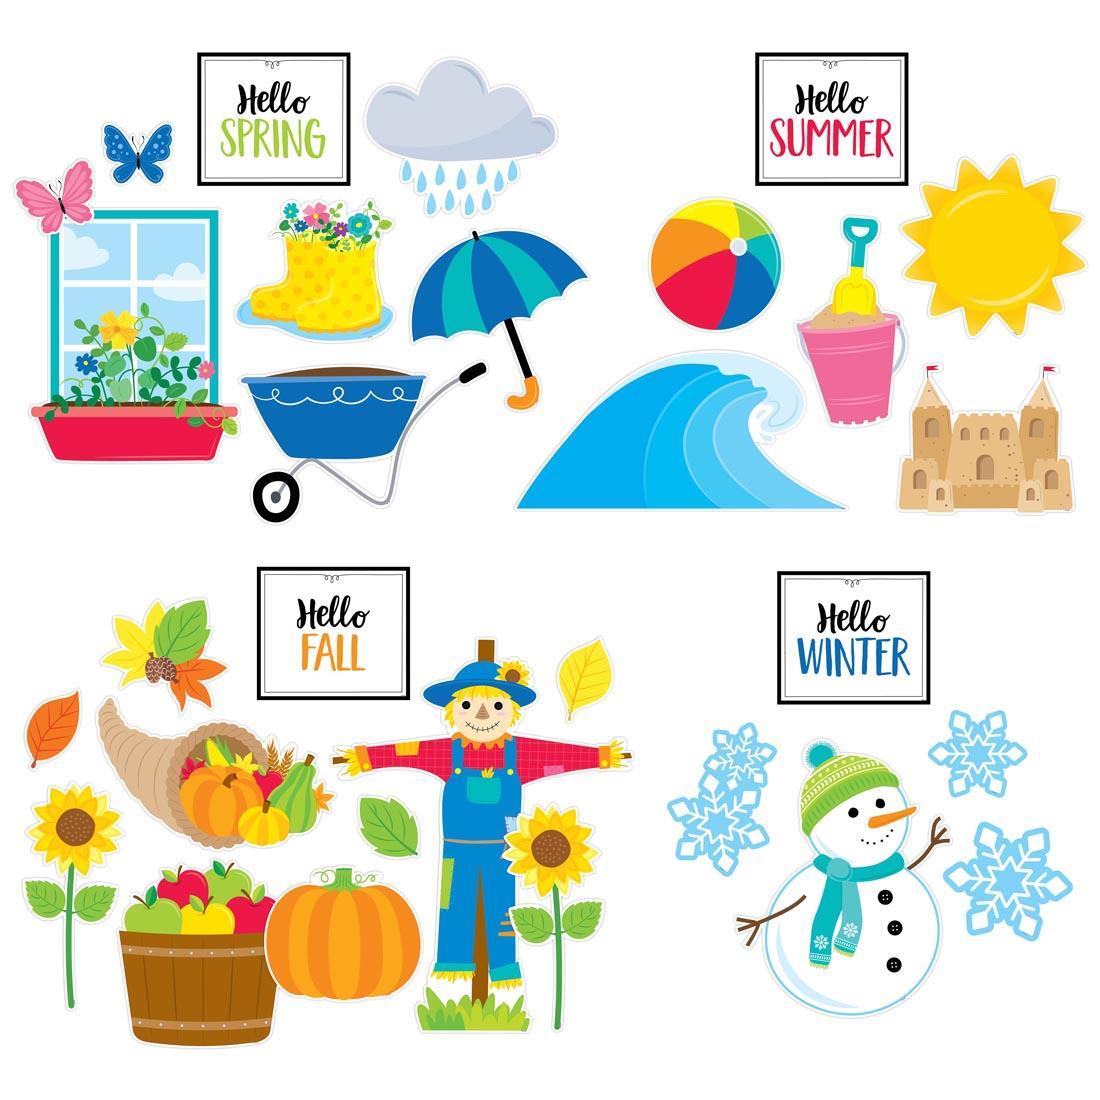 Year-Round Seasonal Accents Bulletin Board Set from the Core Decor collection by Creative Teaching Press